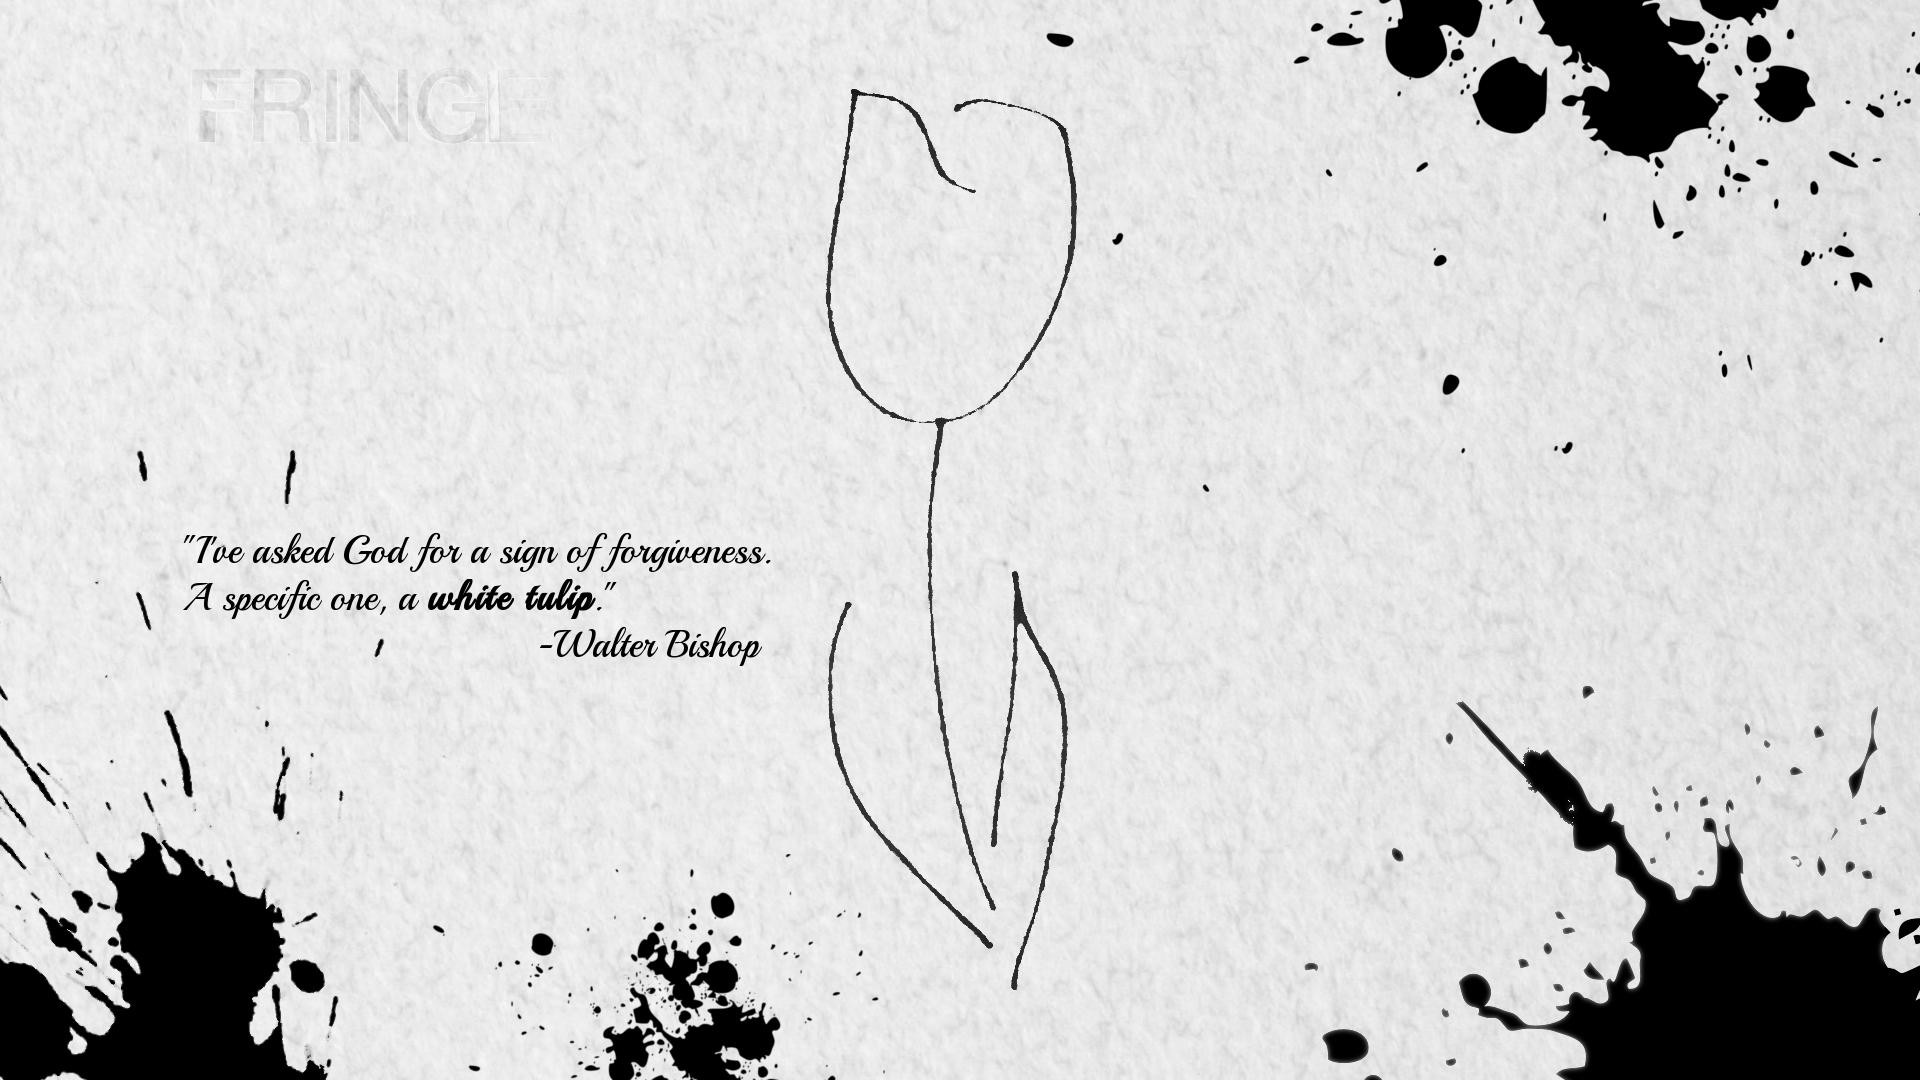 1920x1080 Nothing Has Been Able To Fill The Void Fringe Fringe White Tulip Tattoo 1920x1080